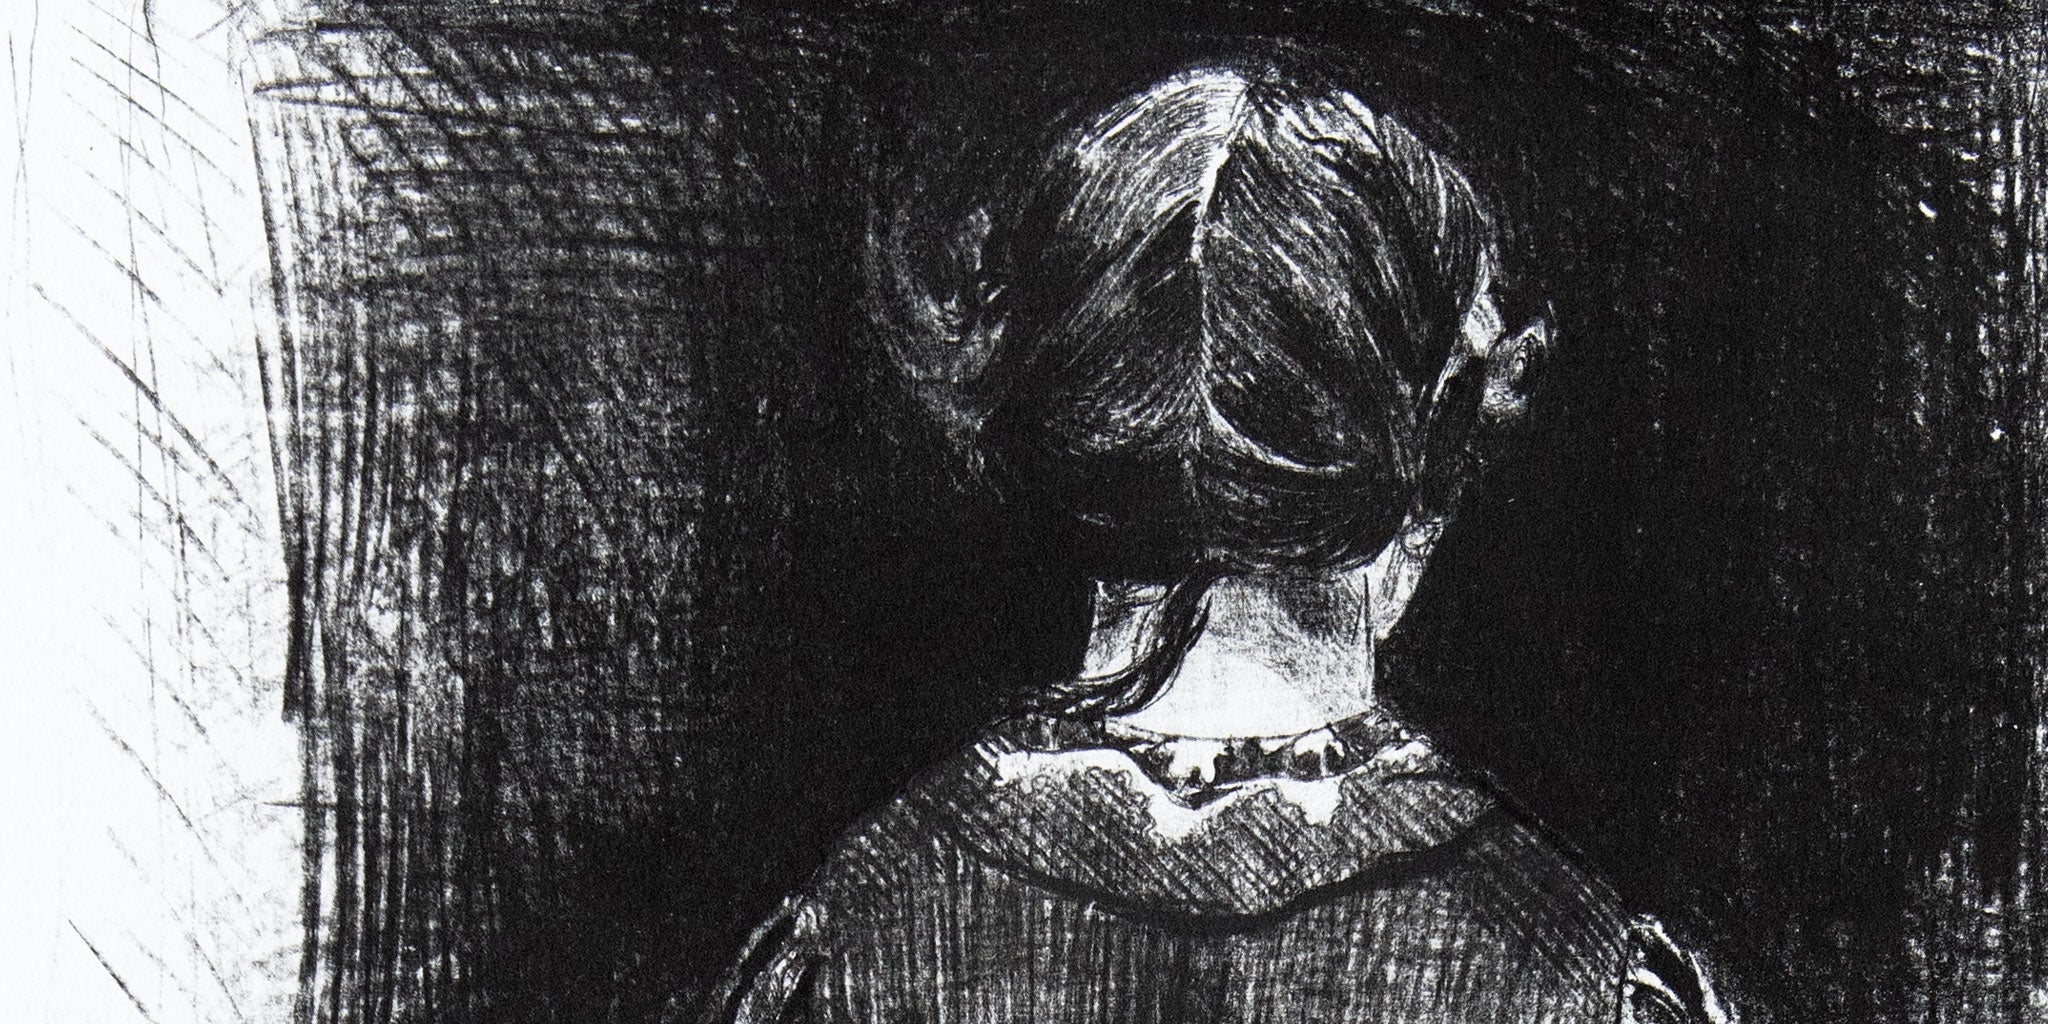 detail from Jane Eyre, signed original lithograph by Paula Rego from her Jane Eyre suite, 2001-2002 